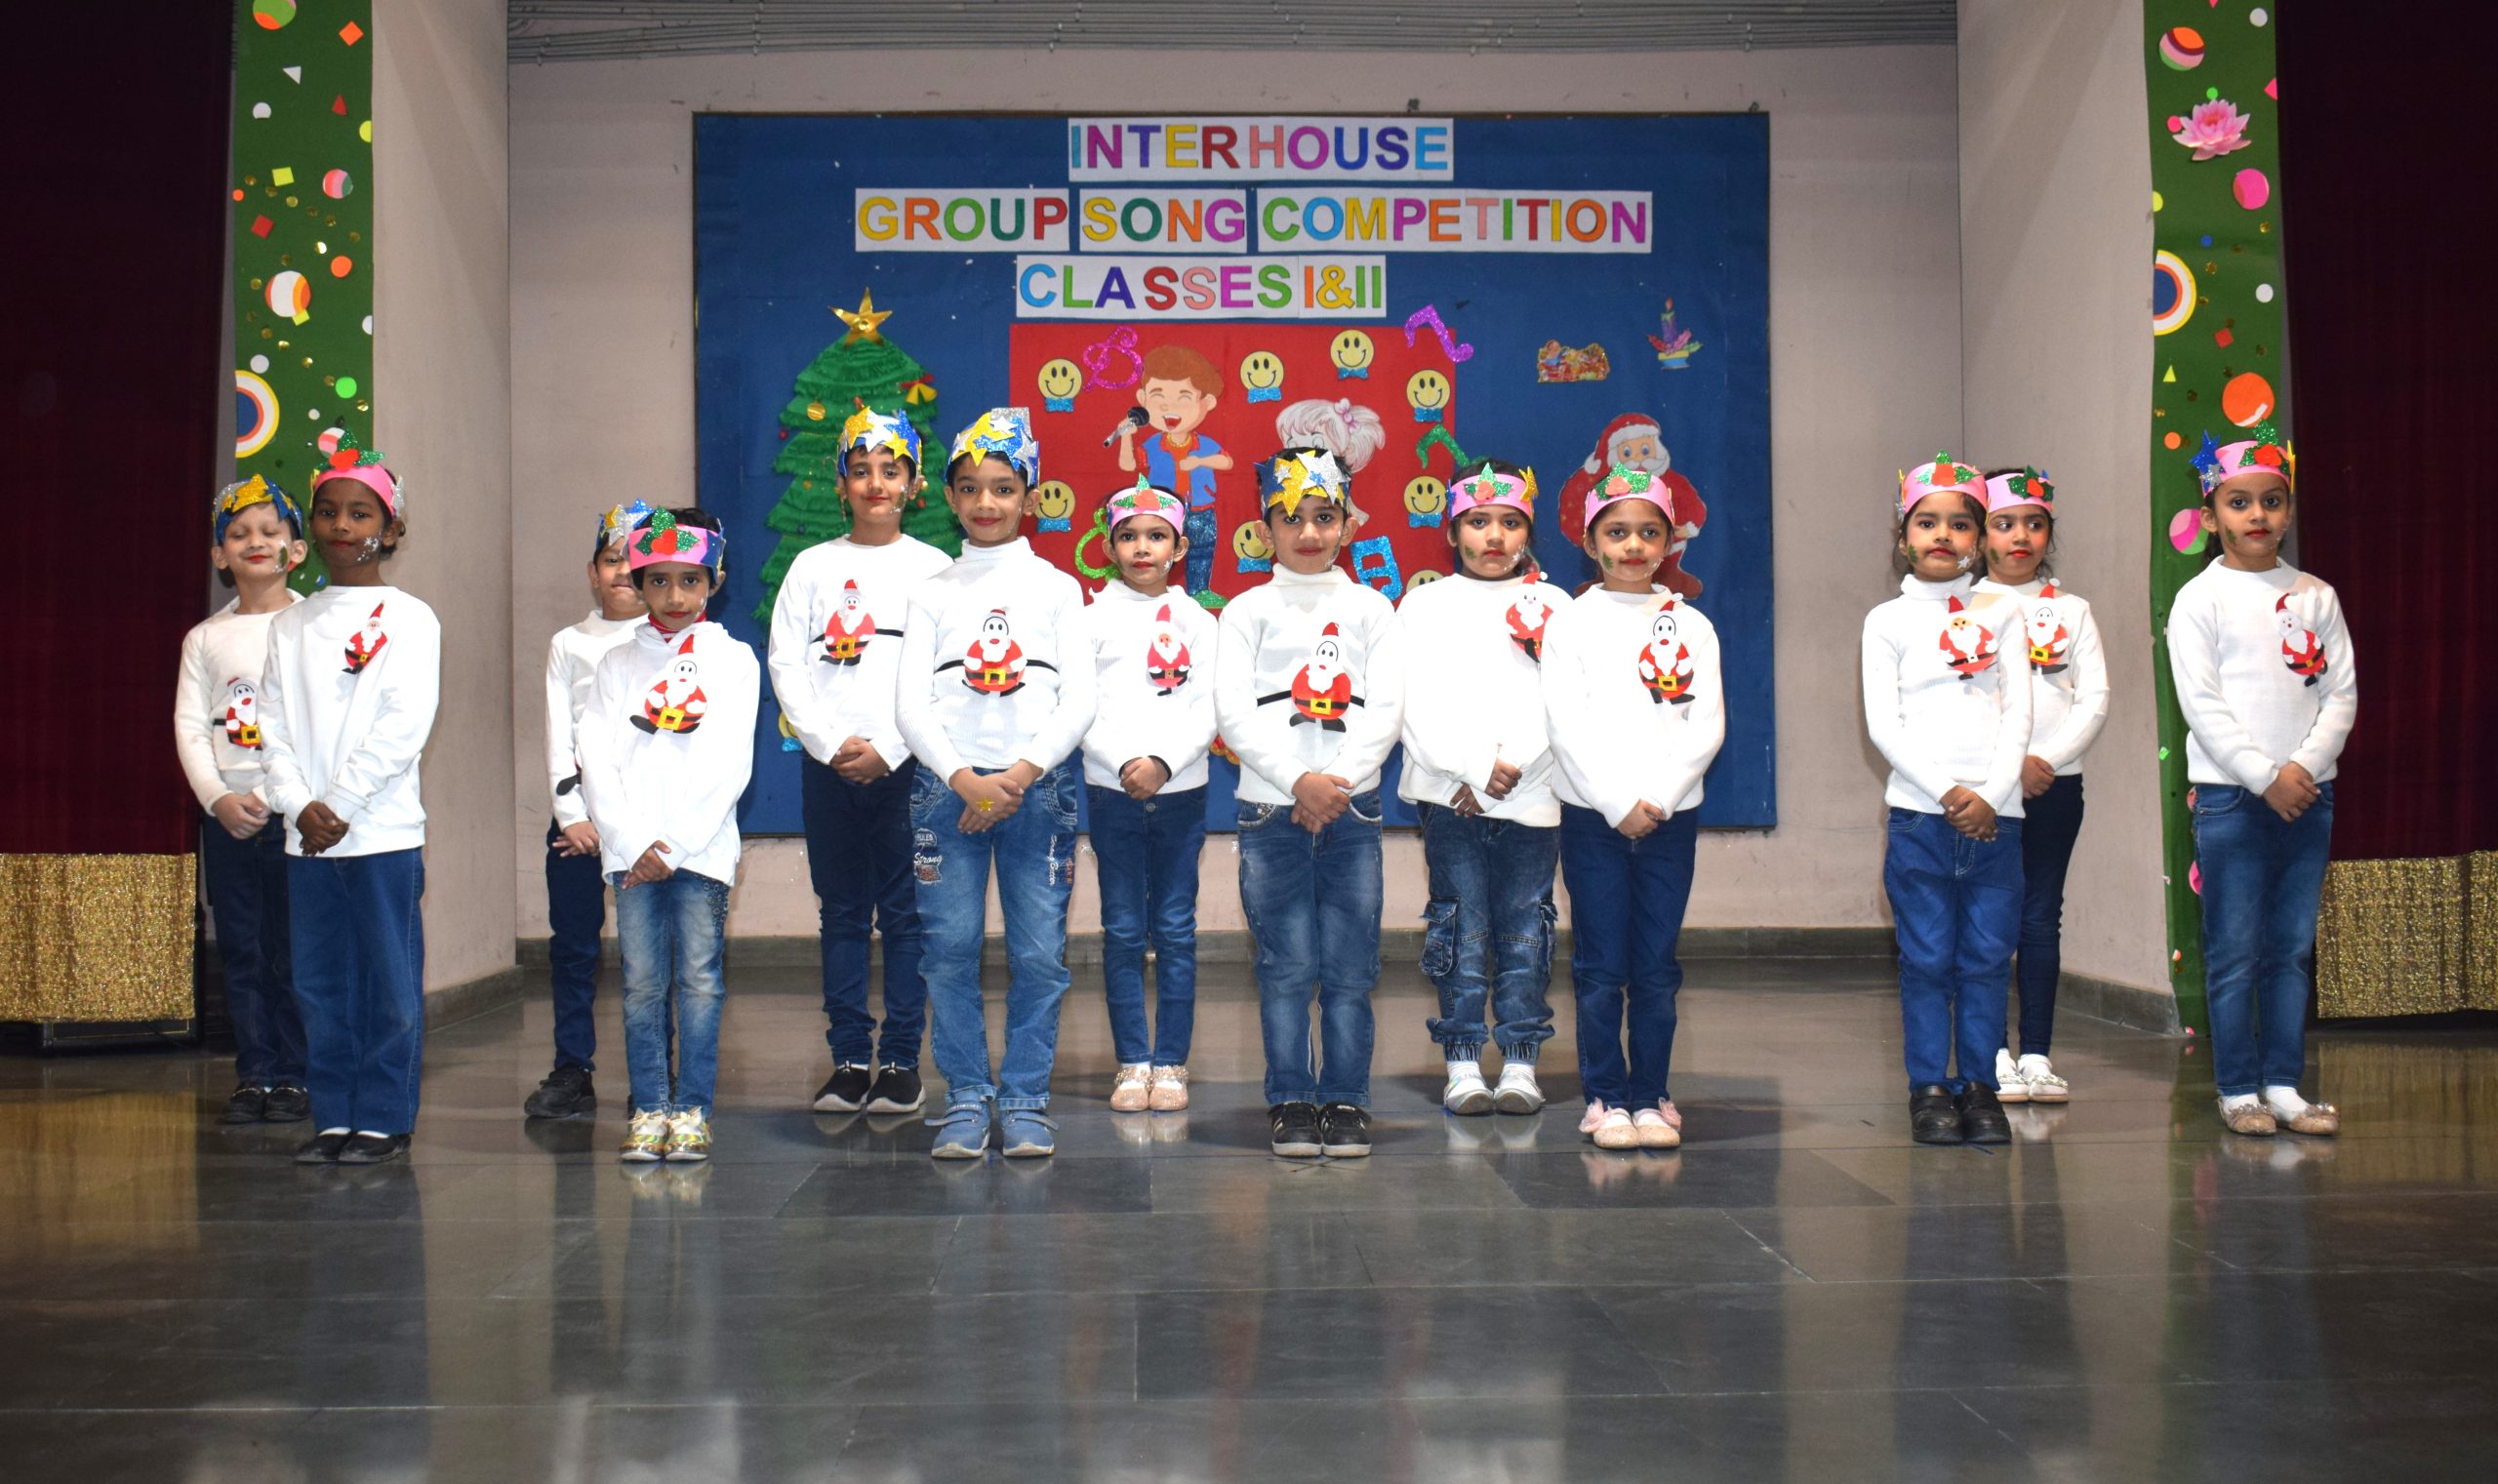 Inter House Group  Song Competition Classes 1 & 2